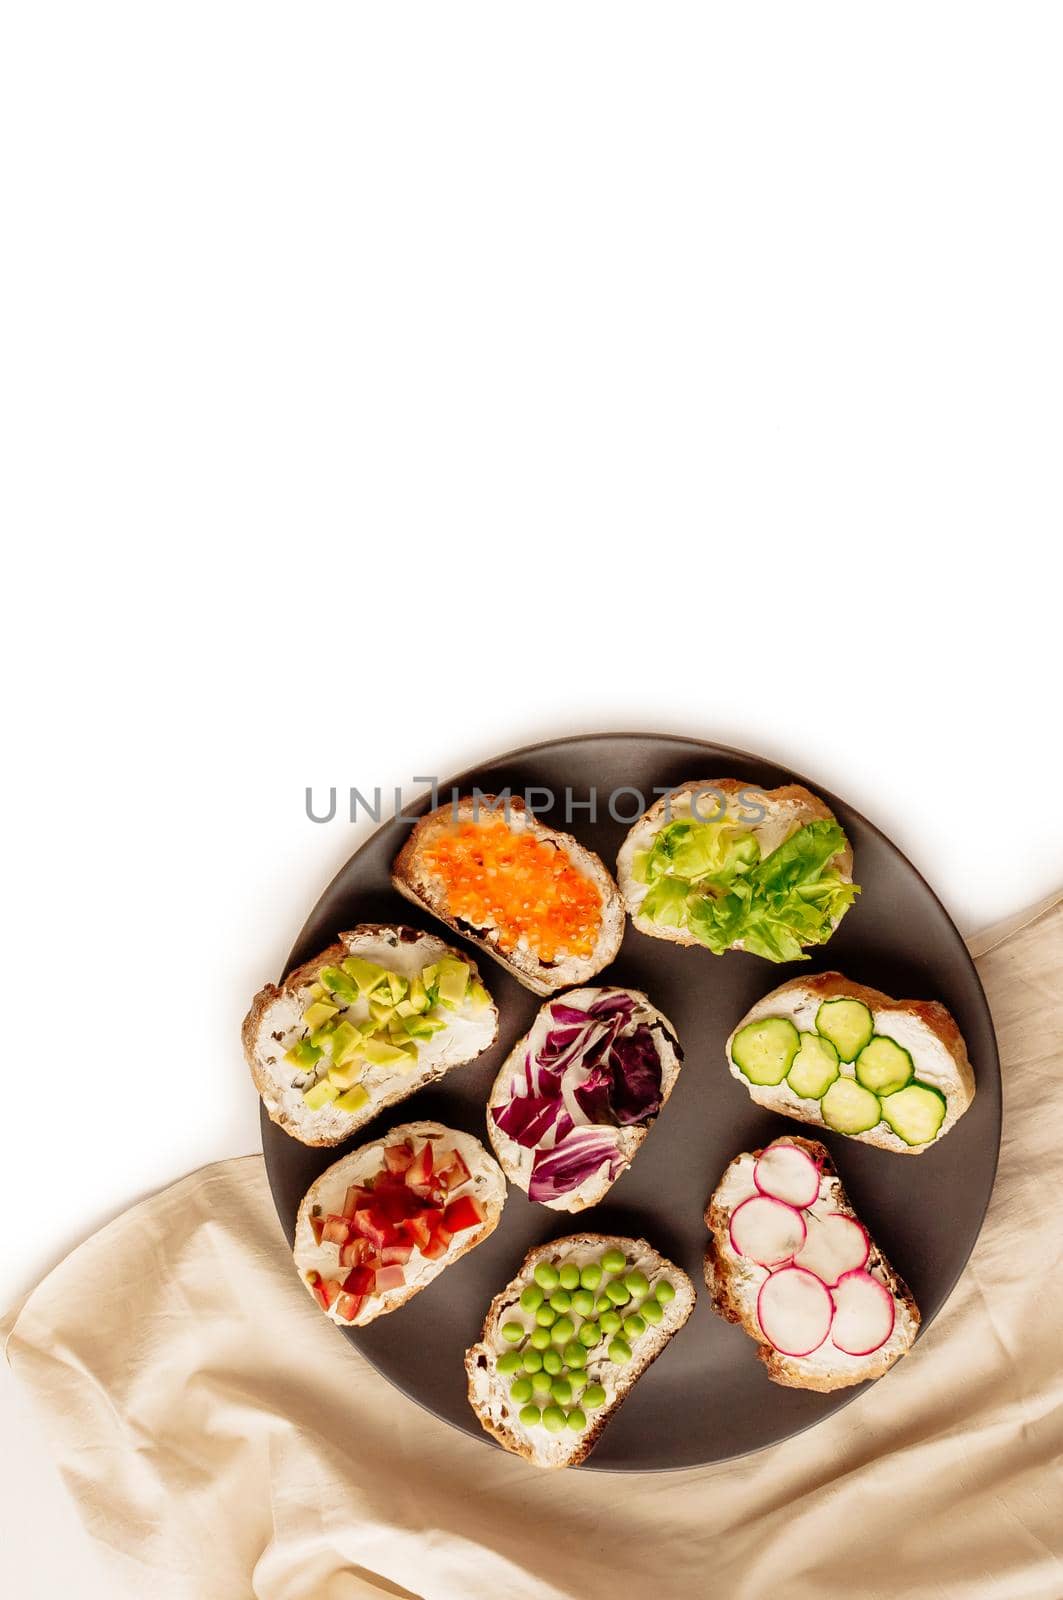 Mini sandwich set with french baguette, cheese, fish and avocado on white background top view mock up.copy space